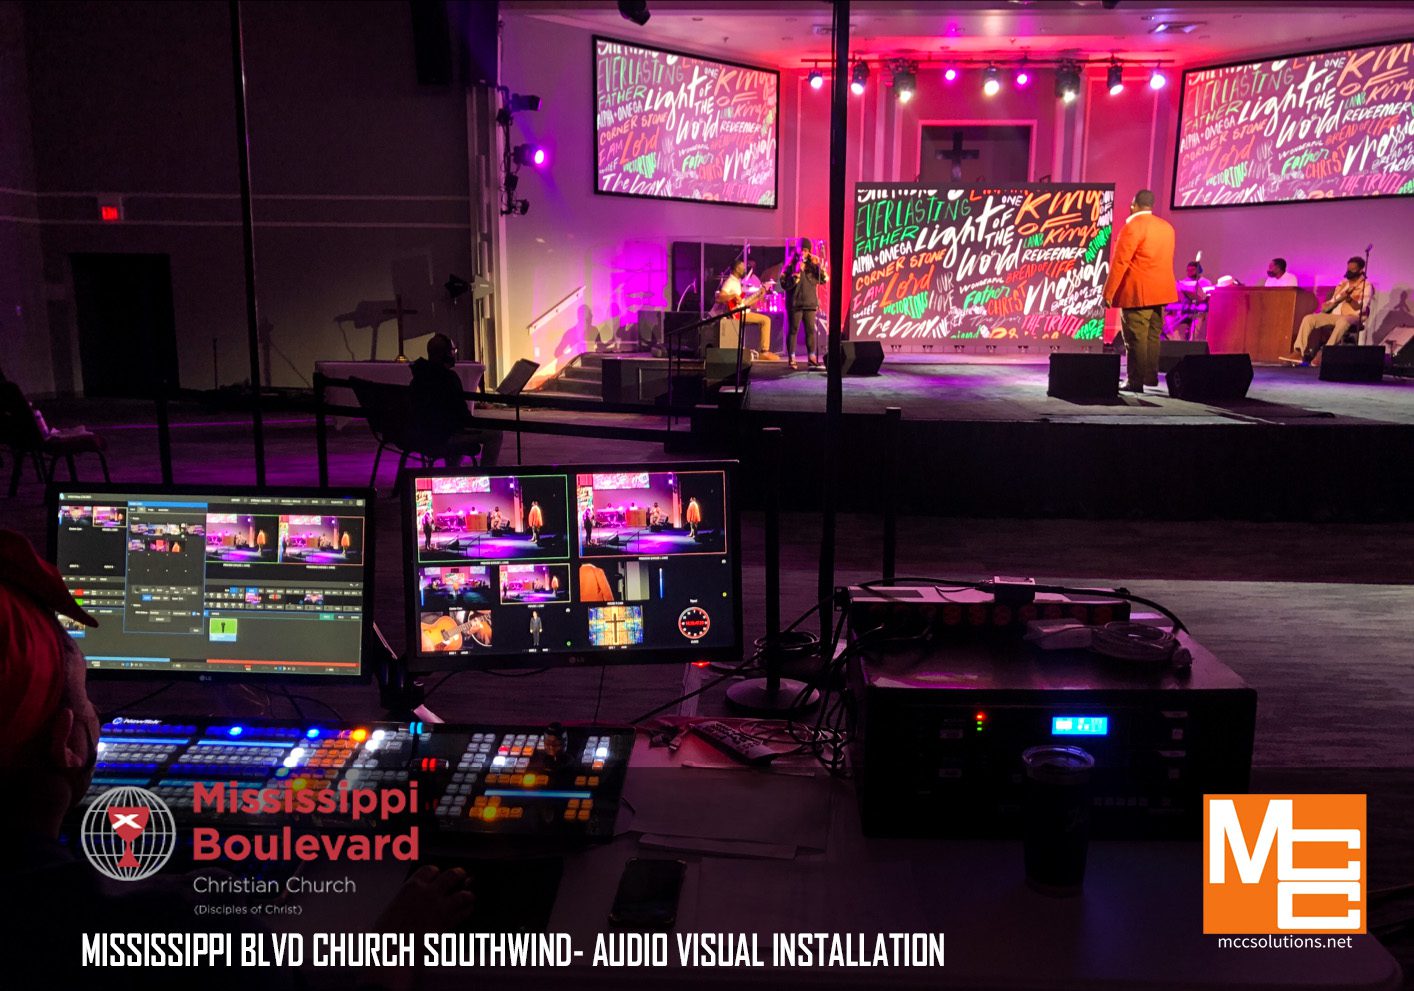 MCC audio visual installation of lighting and sound at a church